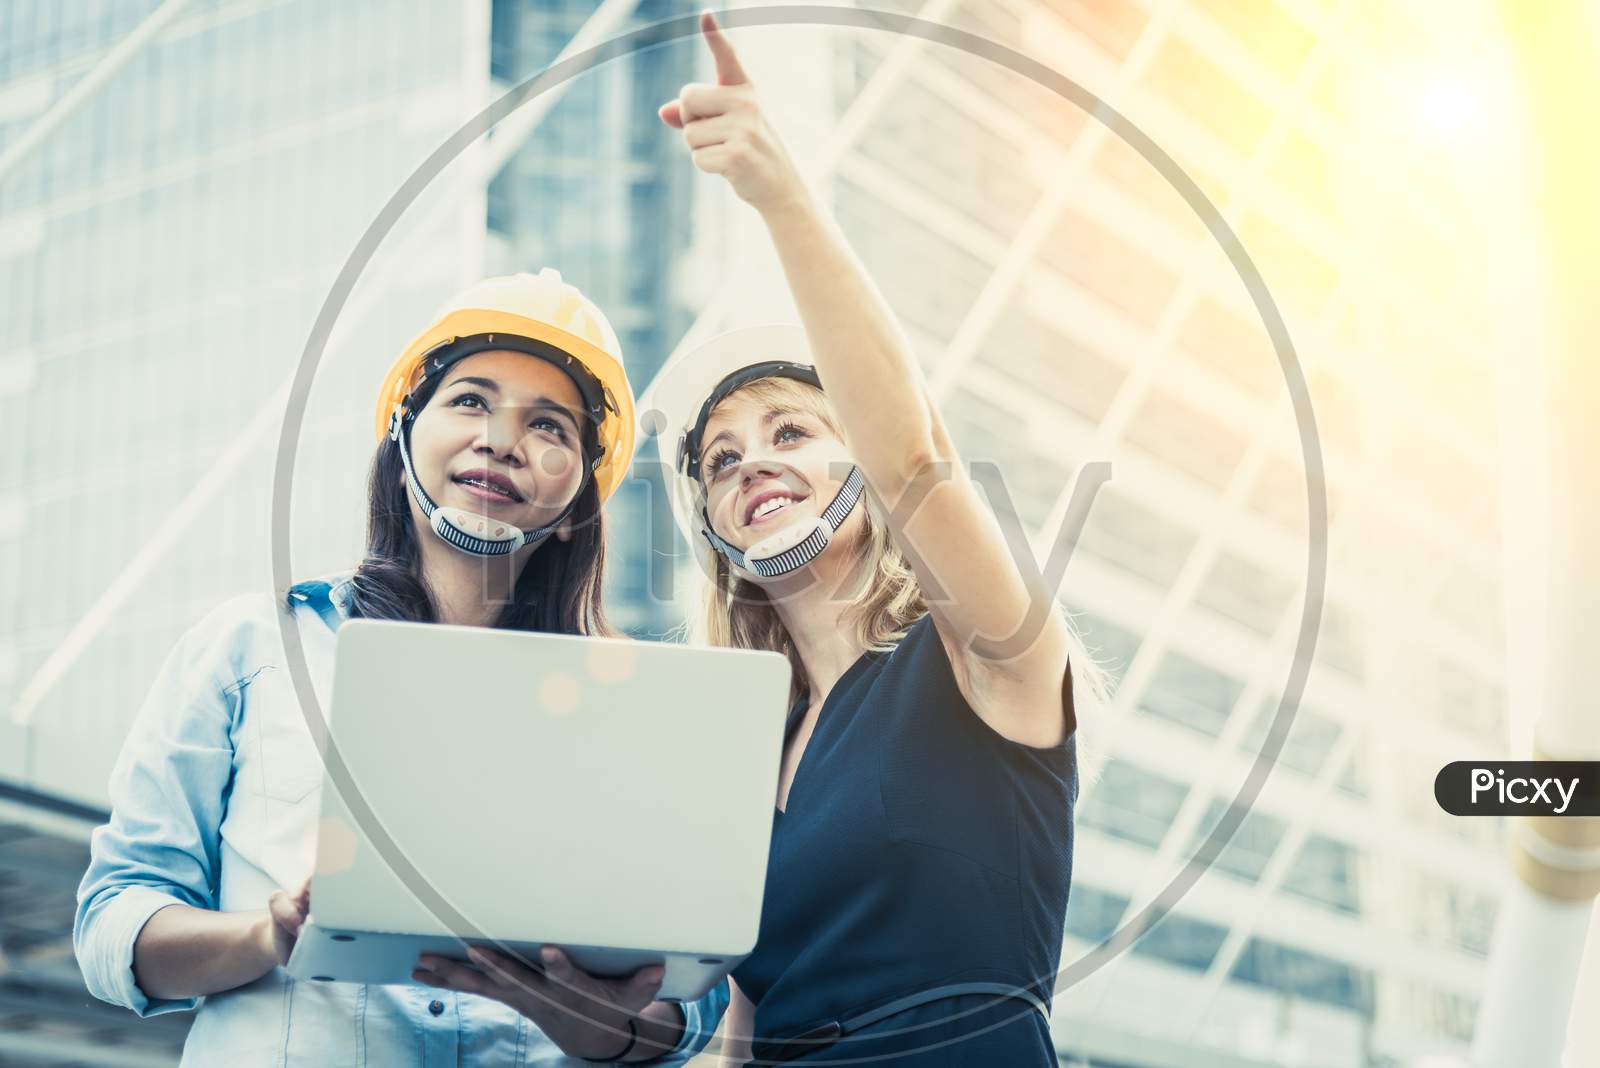 Two Women Engineering Surveying For Startup And Launching New Project. Building And Construction Concept. Business And Happiness Of Cooperation Concept. Civil Engineer Theme. City And Urban Theme